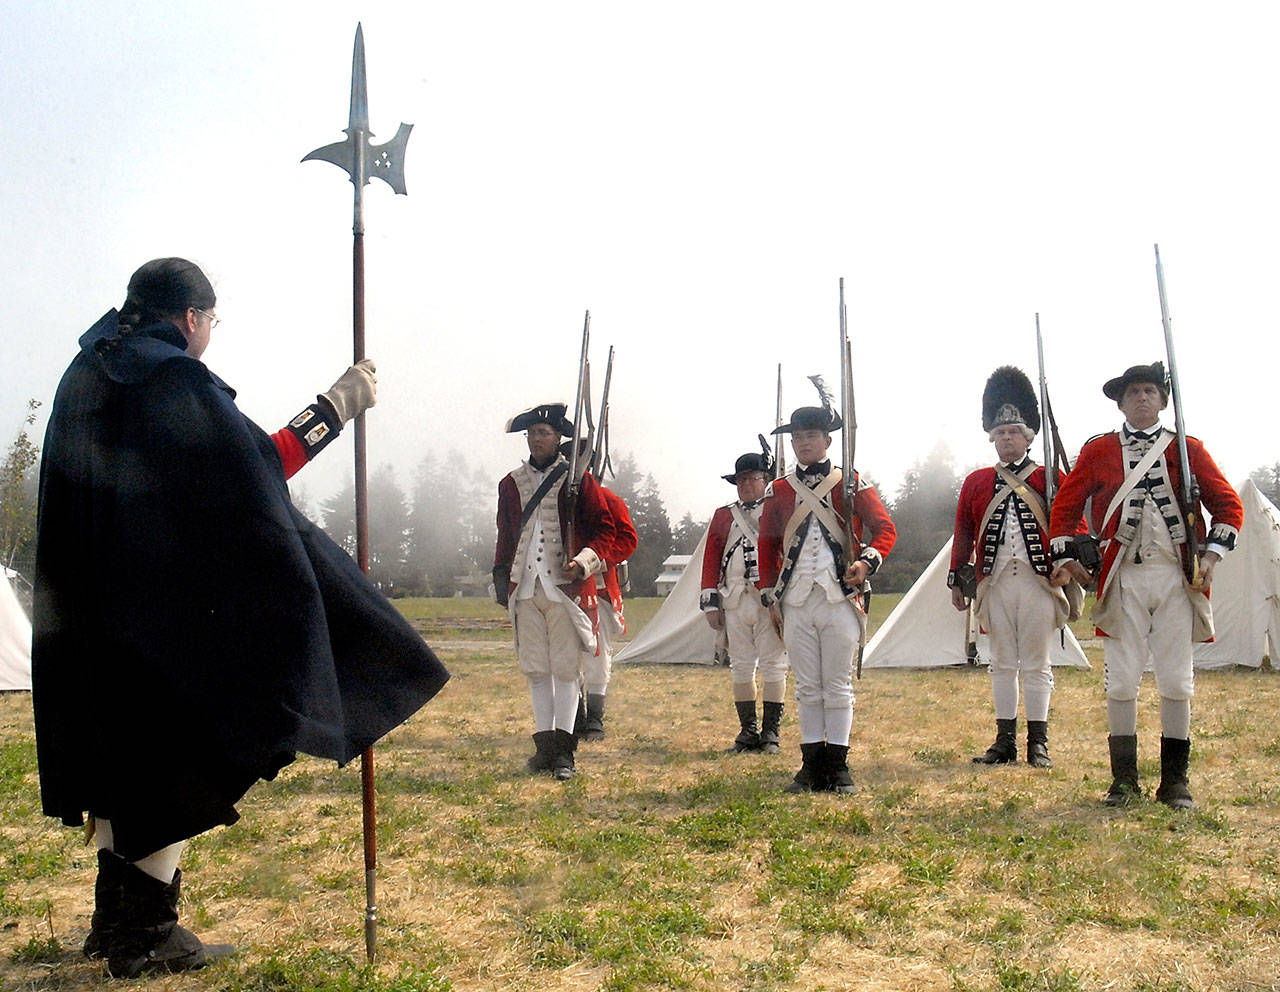 American Revolutionary War re-enactor Dennis LeMay of San Diego, Calif., left, oversees a collection of troops in a firearms drill Friday at the third annual Northwest Colonial Festival at the George Washington Inn near Agnew. The event, which continues today from 9:30 a.m. to 5:30 p.m., features a collection of re-enactors demonstrating a variety of activities, including life in the 1700s while focusing on the April 19, 1775, “Skirmish on Lexington Green” and the “Battle for Concord Bridge.” (Keith Thorpe/Peninsula Daily News)